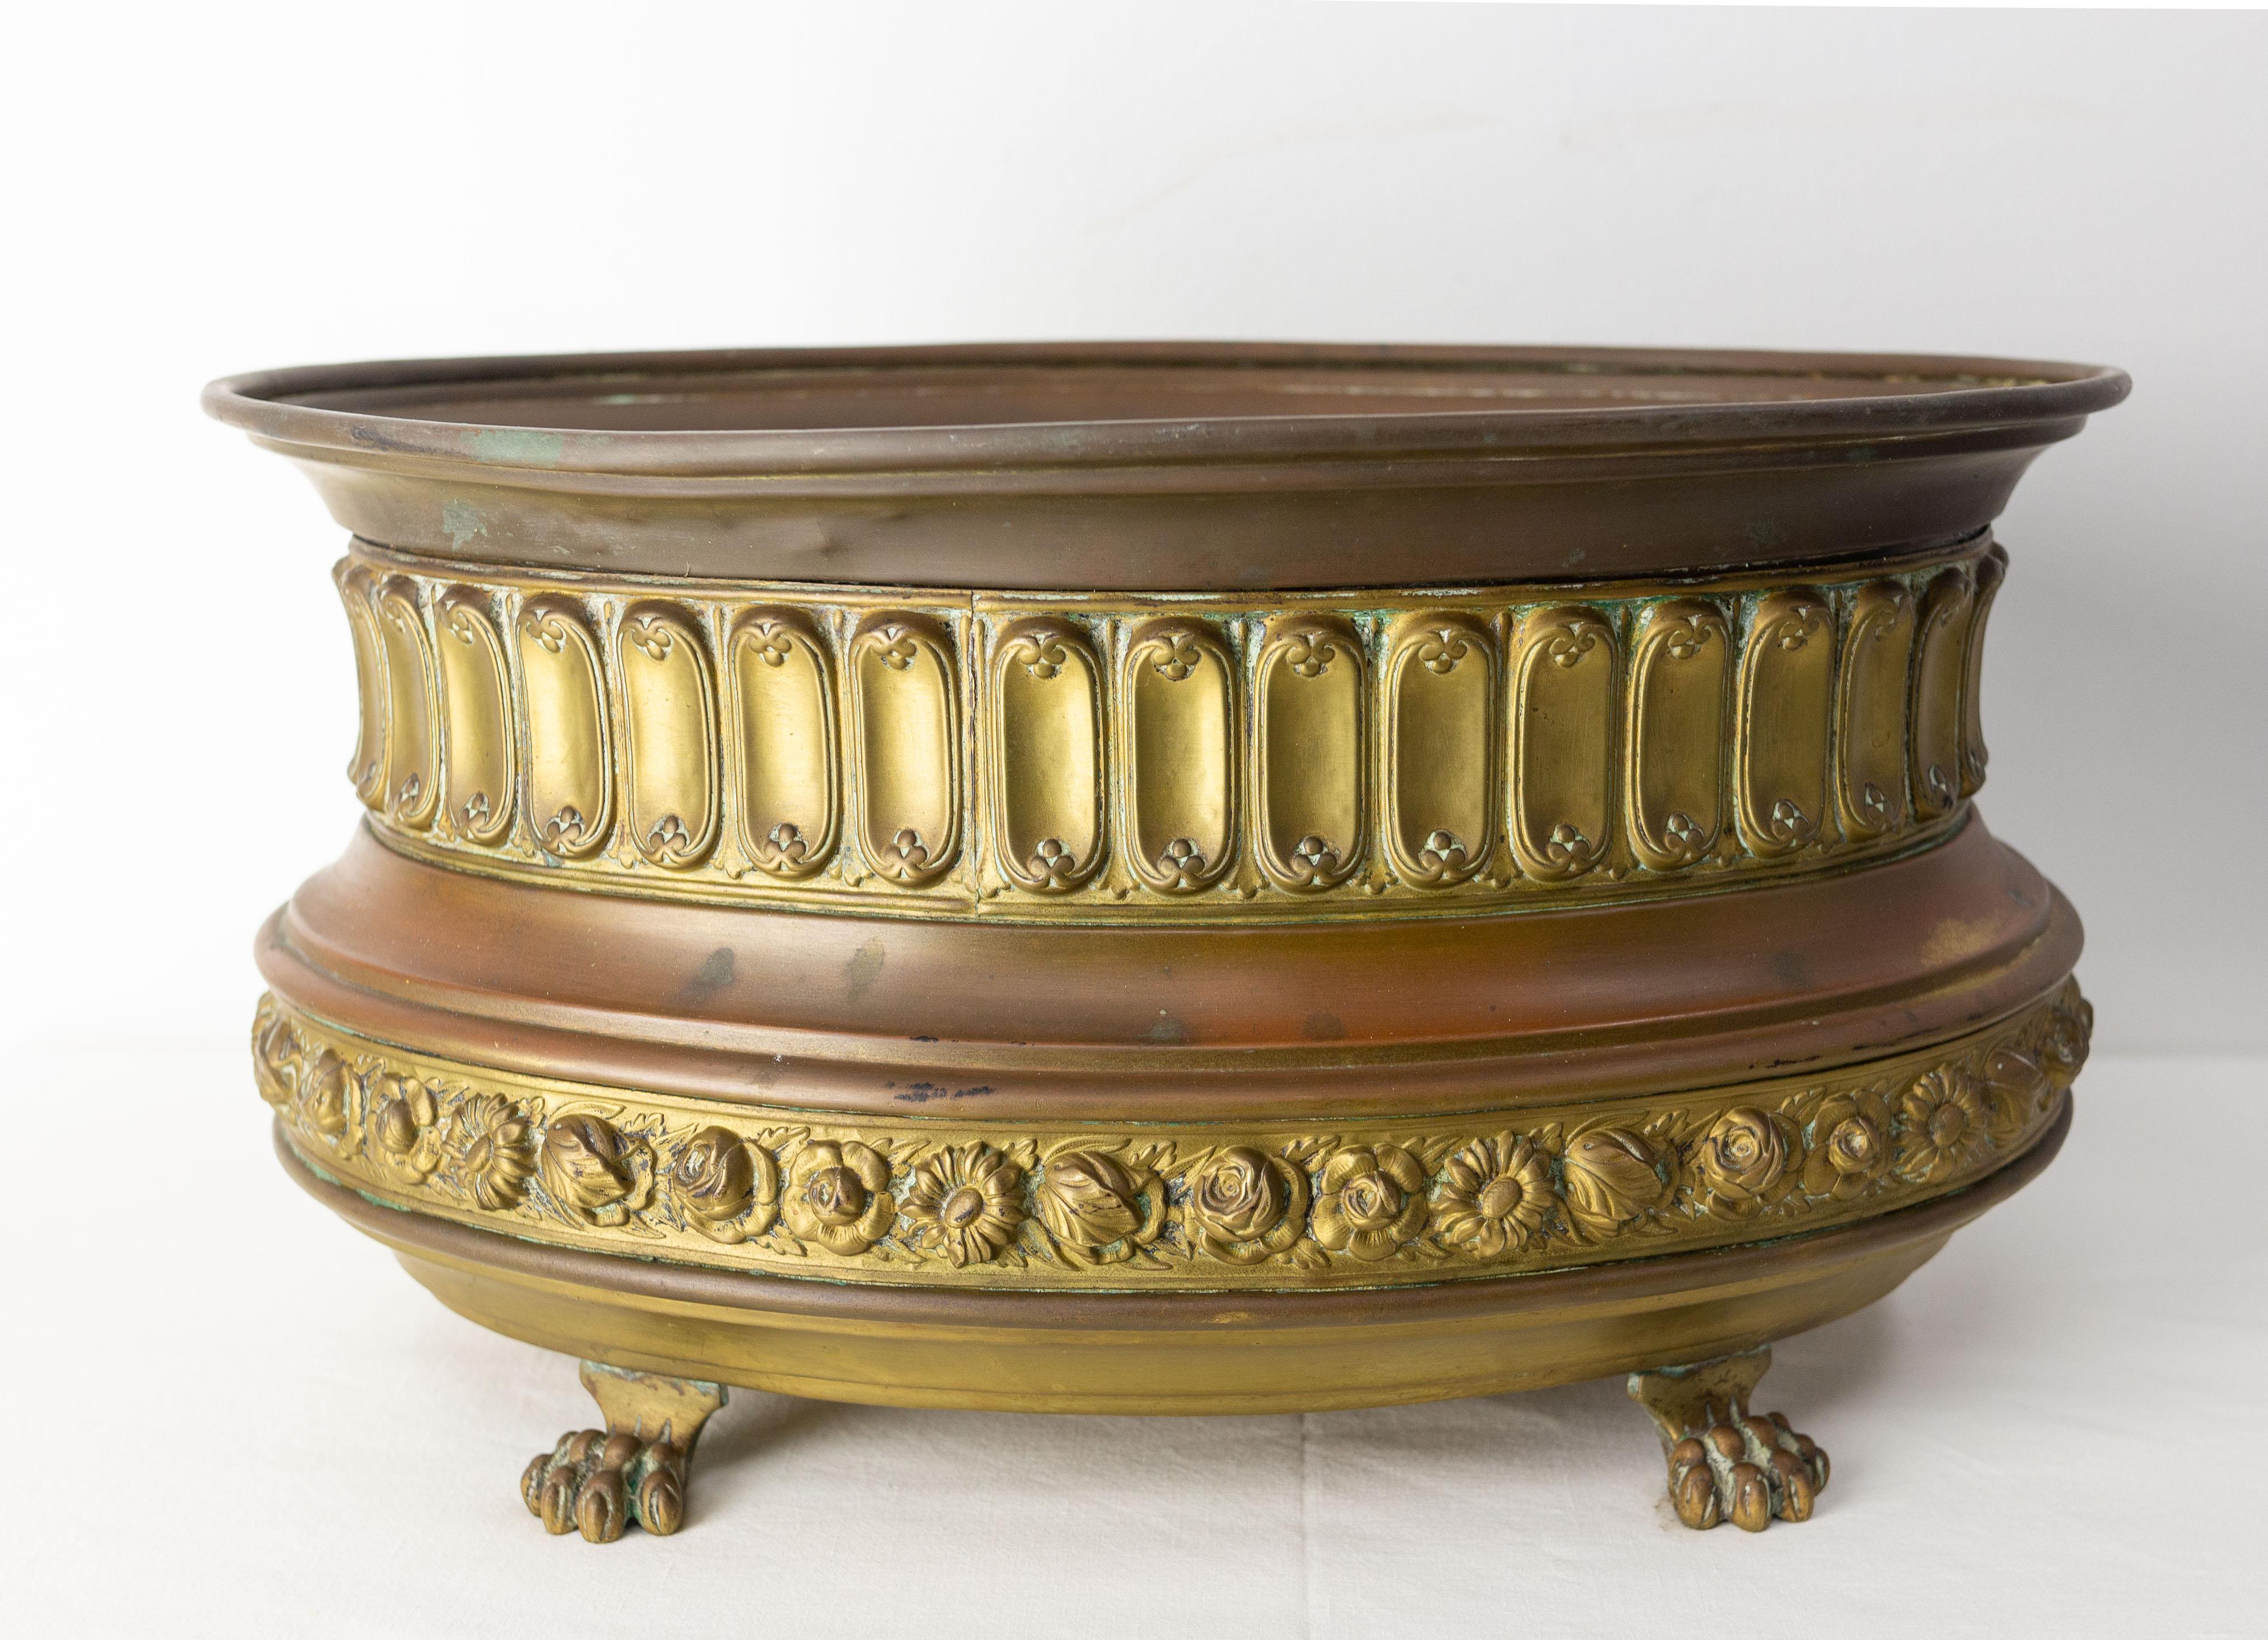 Copper & brass jardiniere center piece with a metal altenance giving a very interesting color scheme.
decoration of canes, roses and lions' feet.
Made circa 1890, in the art Nouveau period, France.

Shipping: 
26.5 / 38.5 / 21 cm 0.9 Kg.